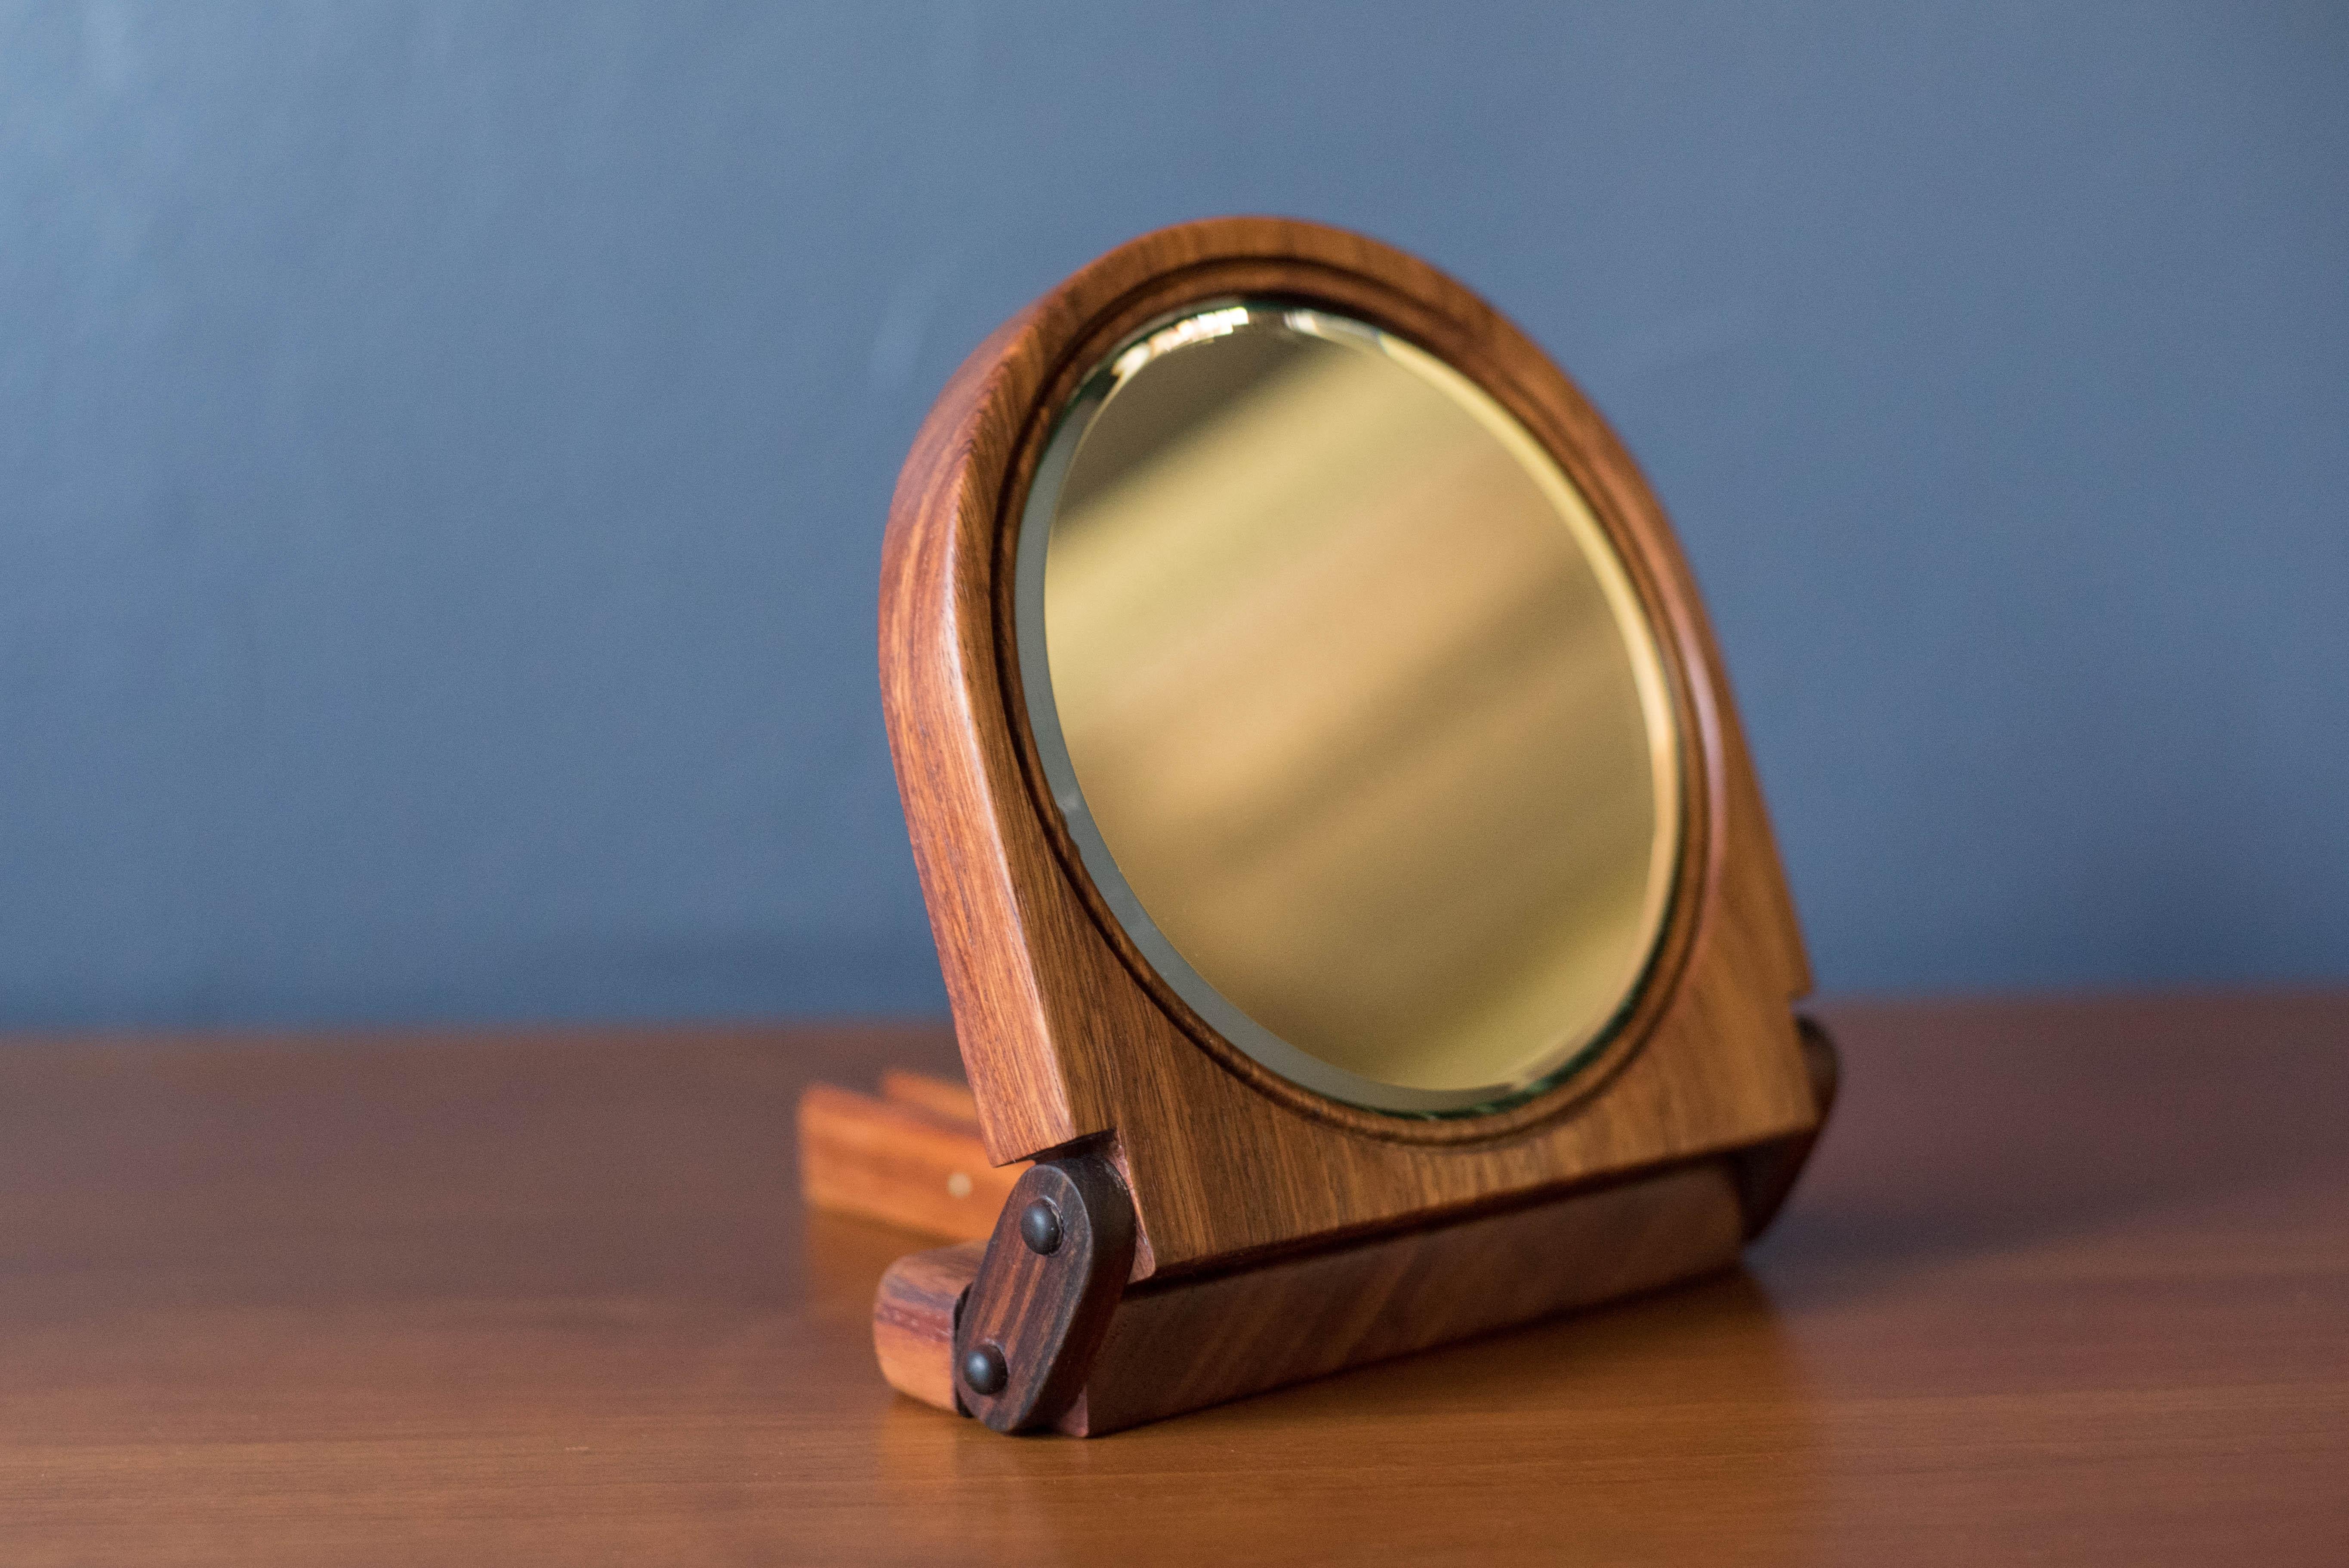 Mid century round foldable mirror with adjustable stand in koa wood. This versatile hand crafted piece is compact in size and can used as a table or small vanity mirror. 

Mirror 5